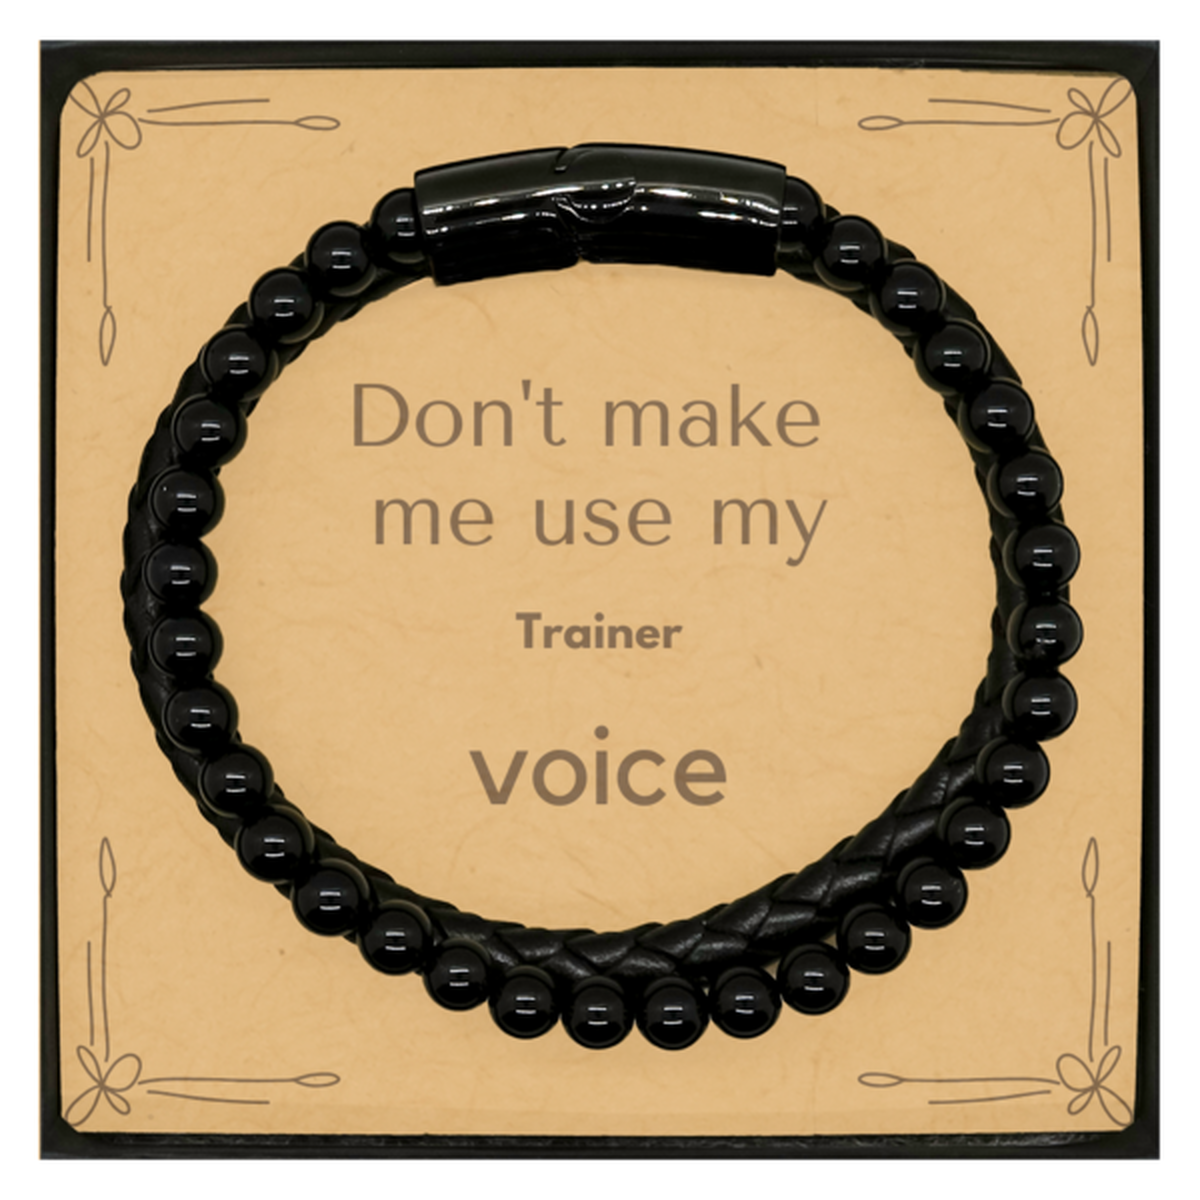 Don't make me use my Trainer voice, Sarcasm Trainer Card Gifts, Christmas Trainer Stone Leather Bracelets Birthday Unique Gifts For Trainer Coworkers, Men, Women, Colleague, Friends